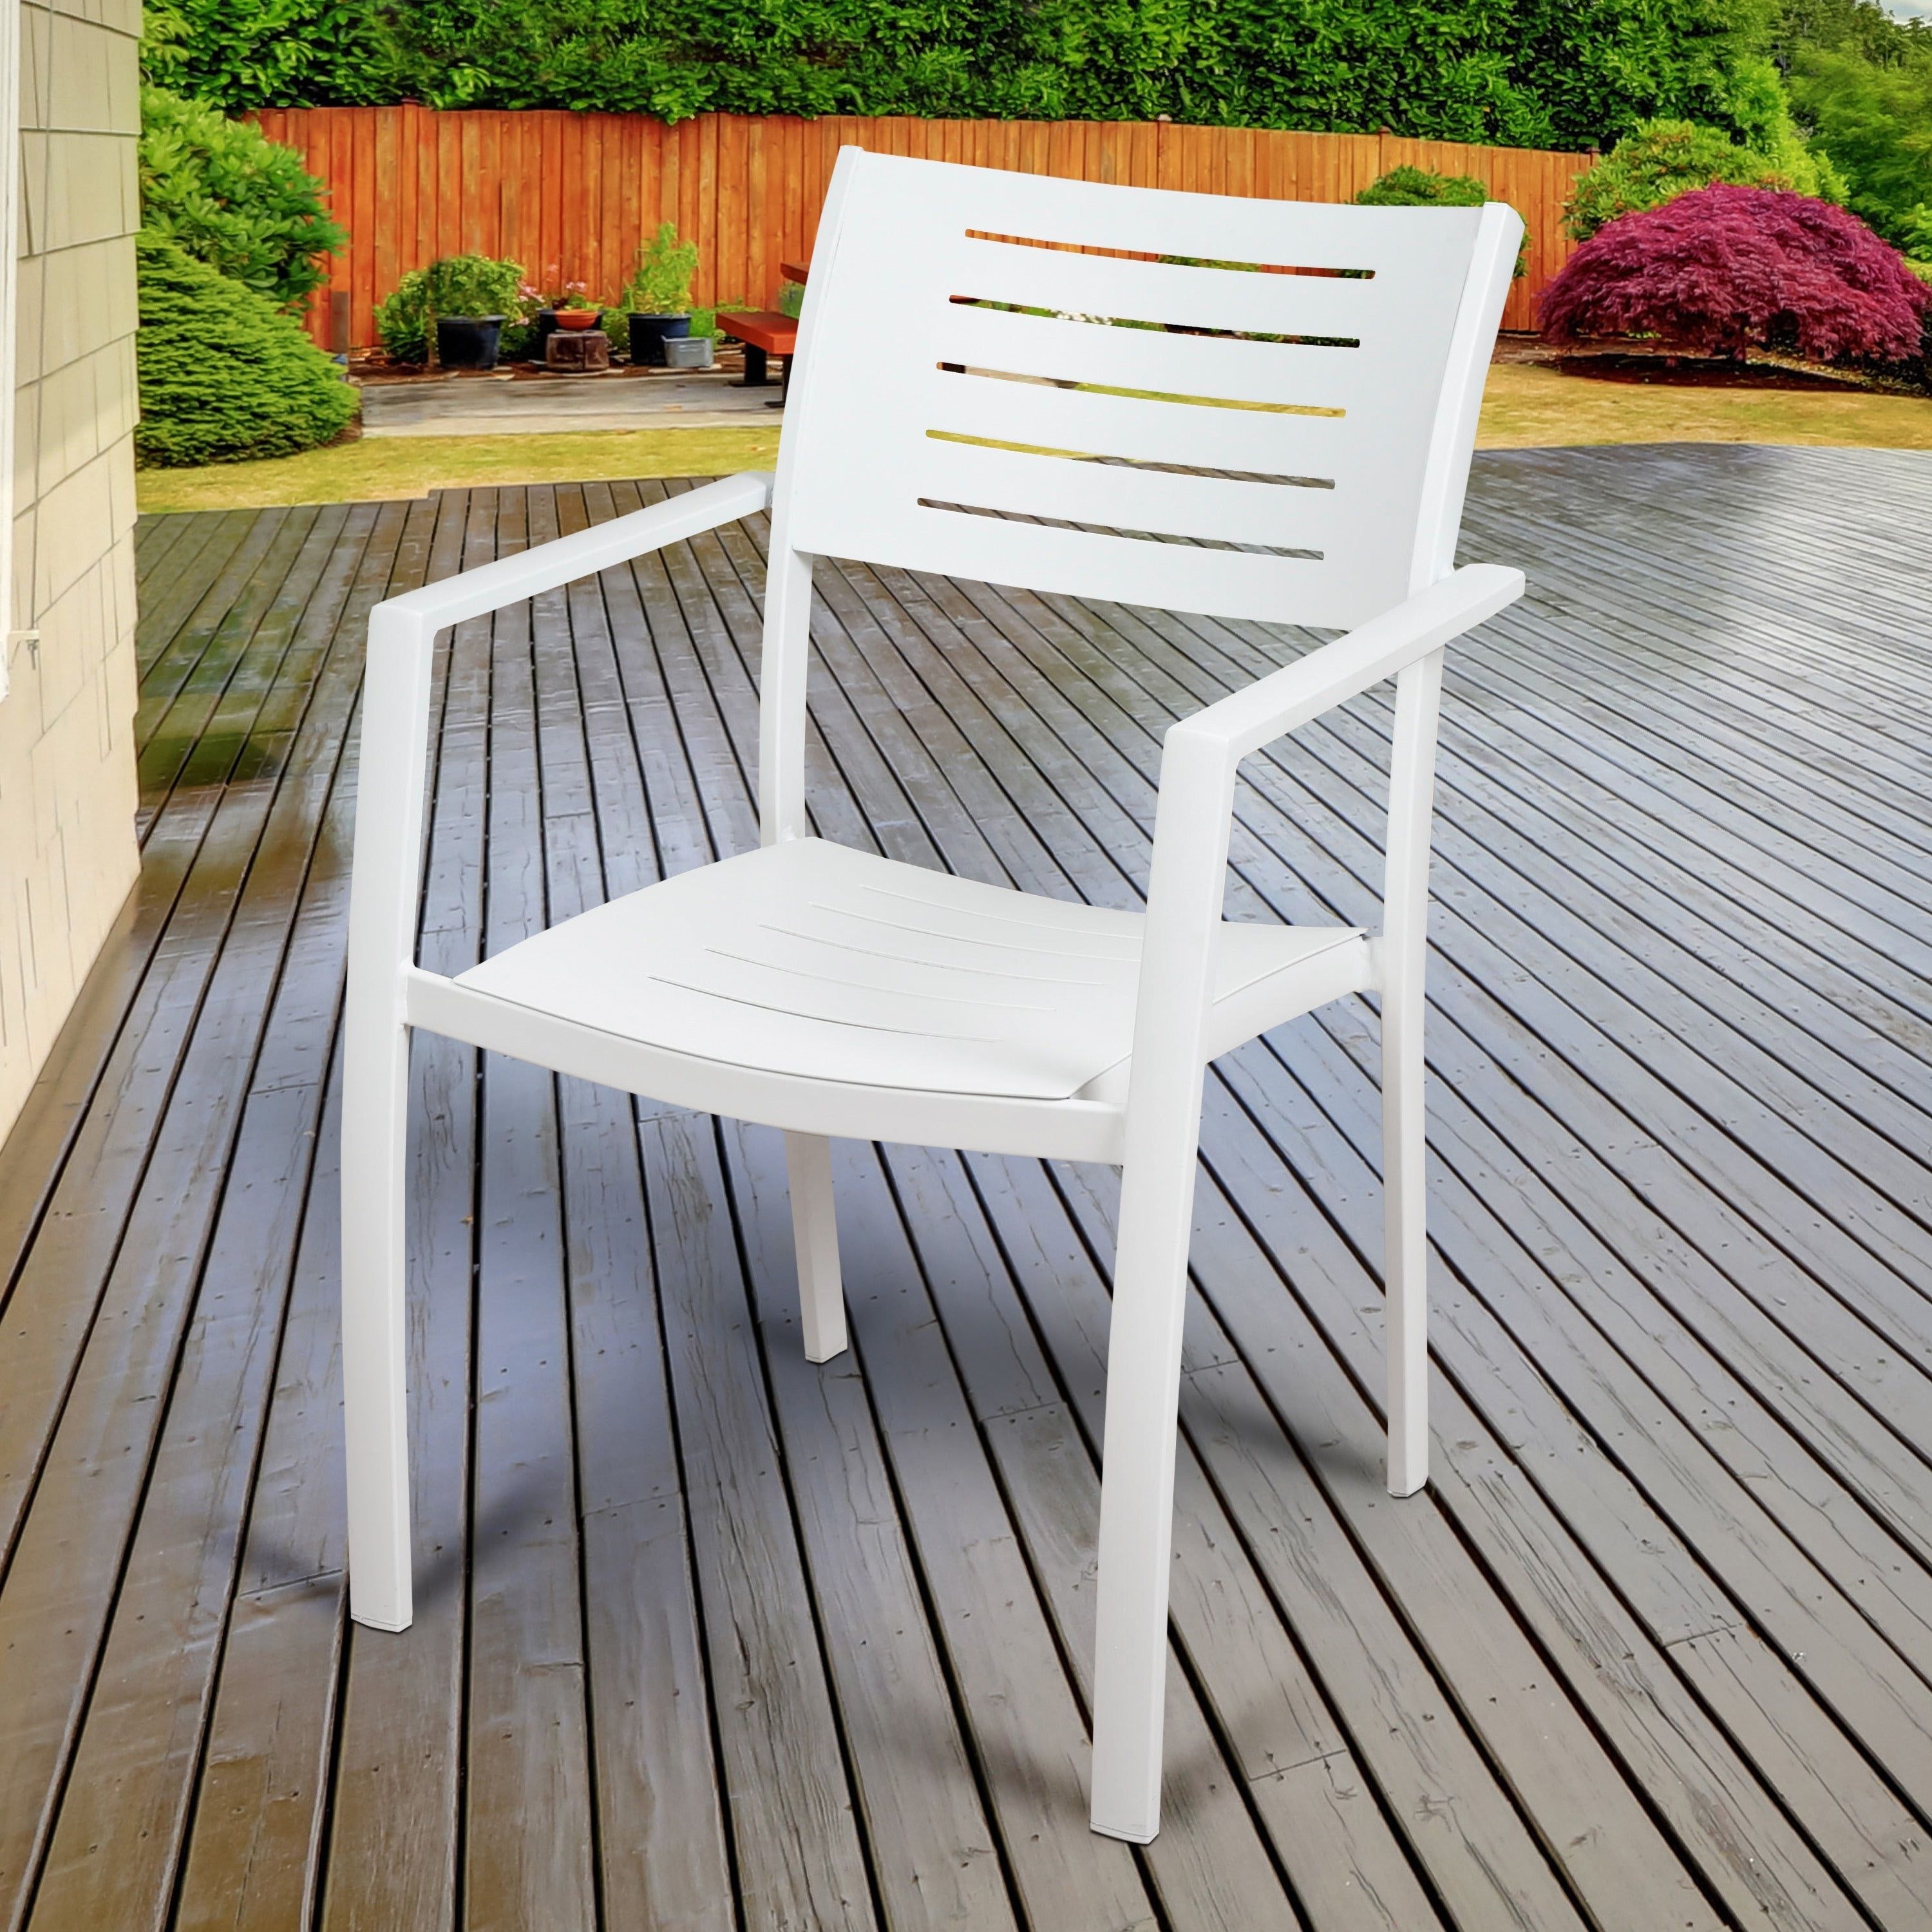 Havenside Home Mandalay 4 Piece Patio Dining Chairs, White Within Best And Newest John 4 Piece Dining Sets (View 16 of 20)